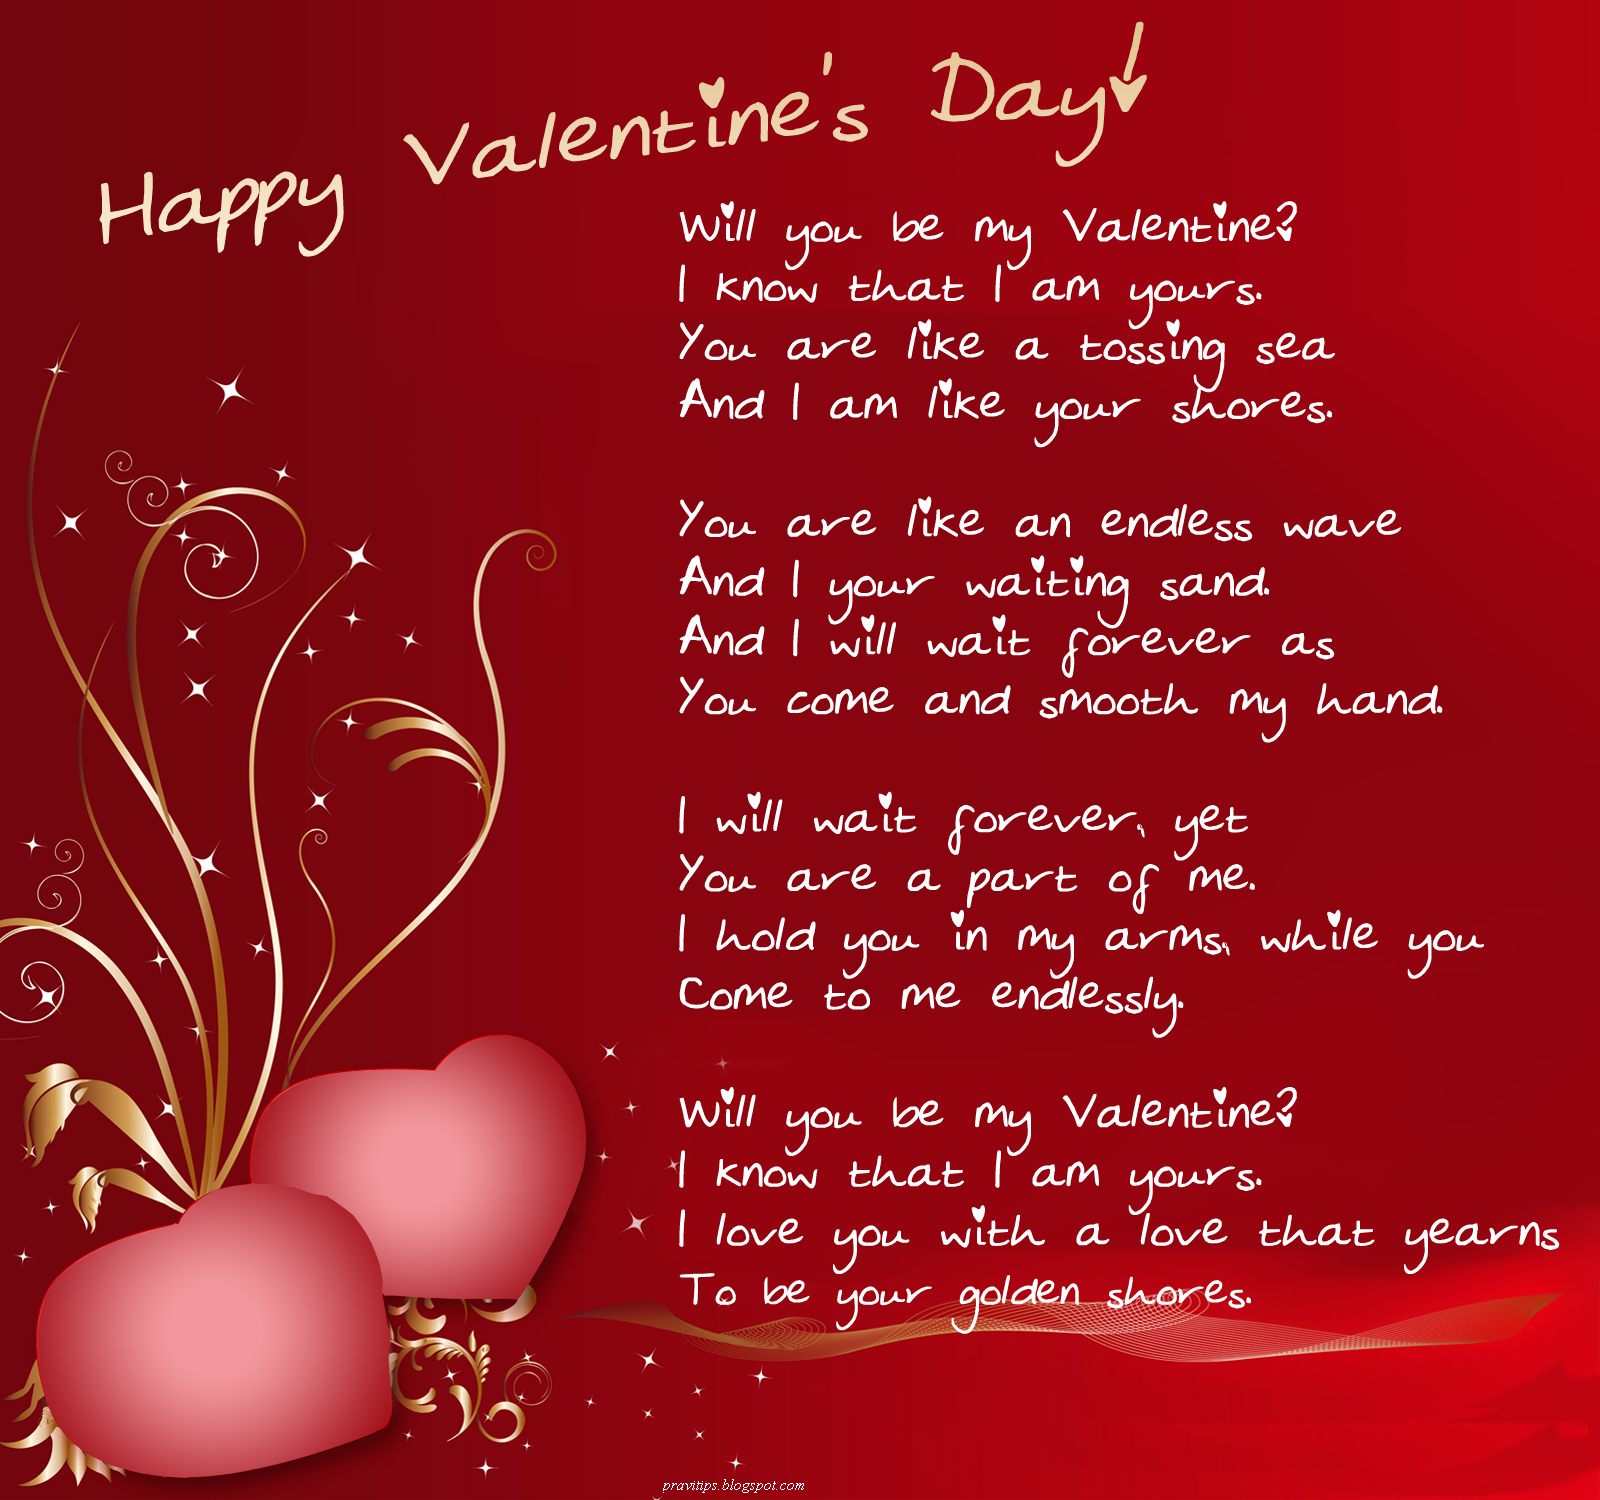 heart touching messages valentines day